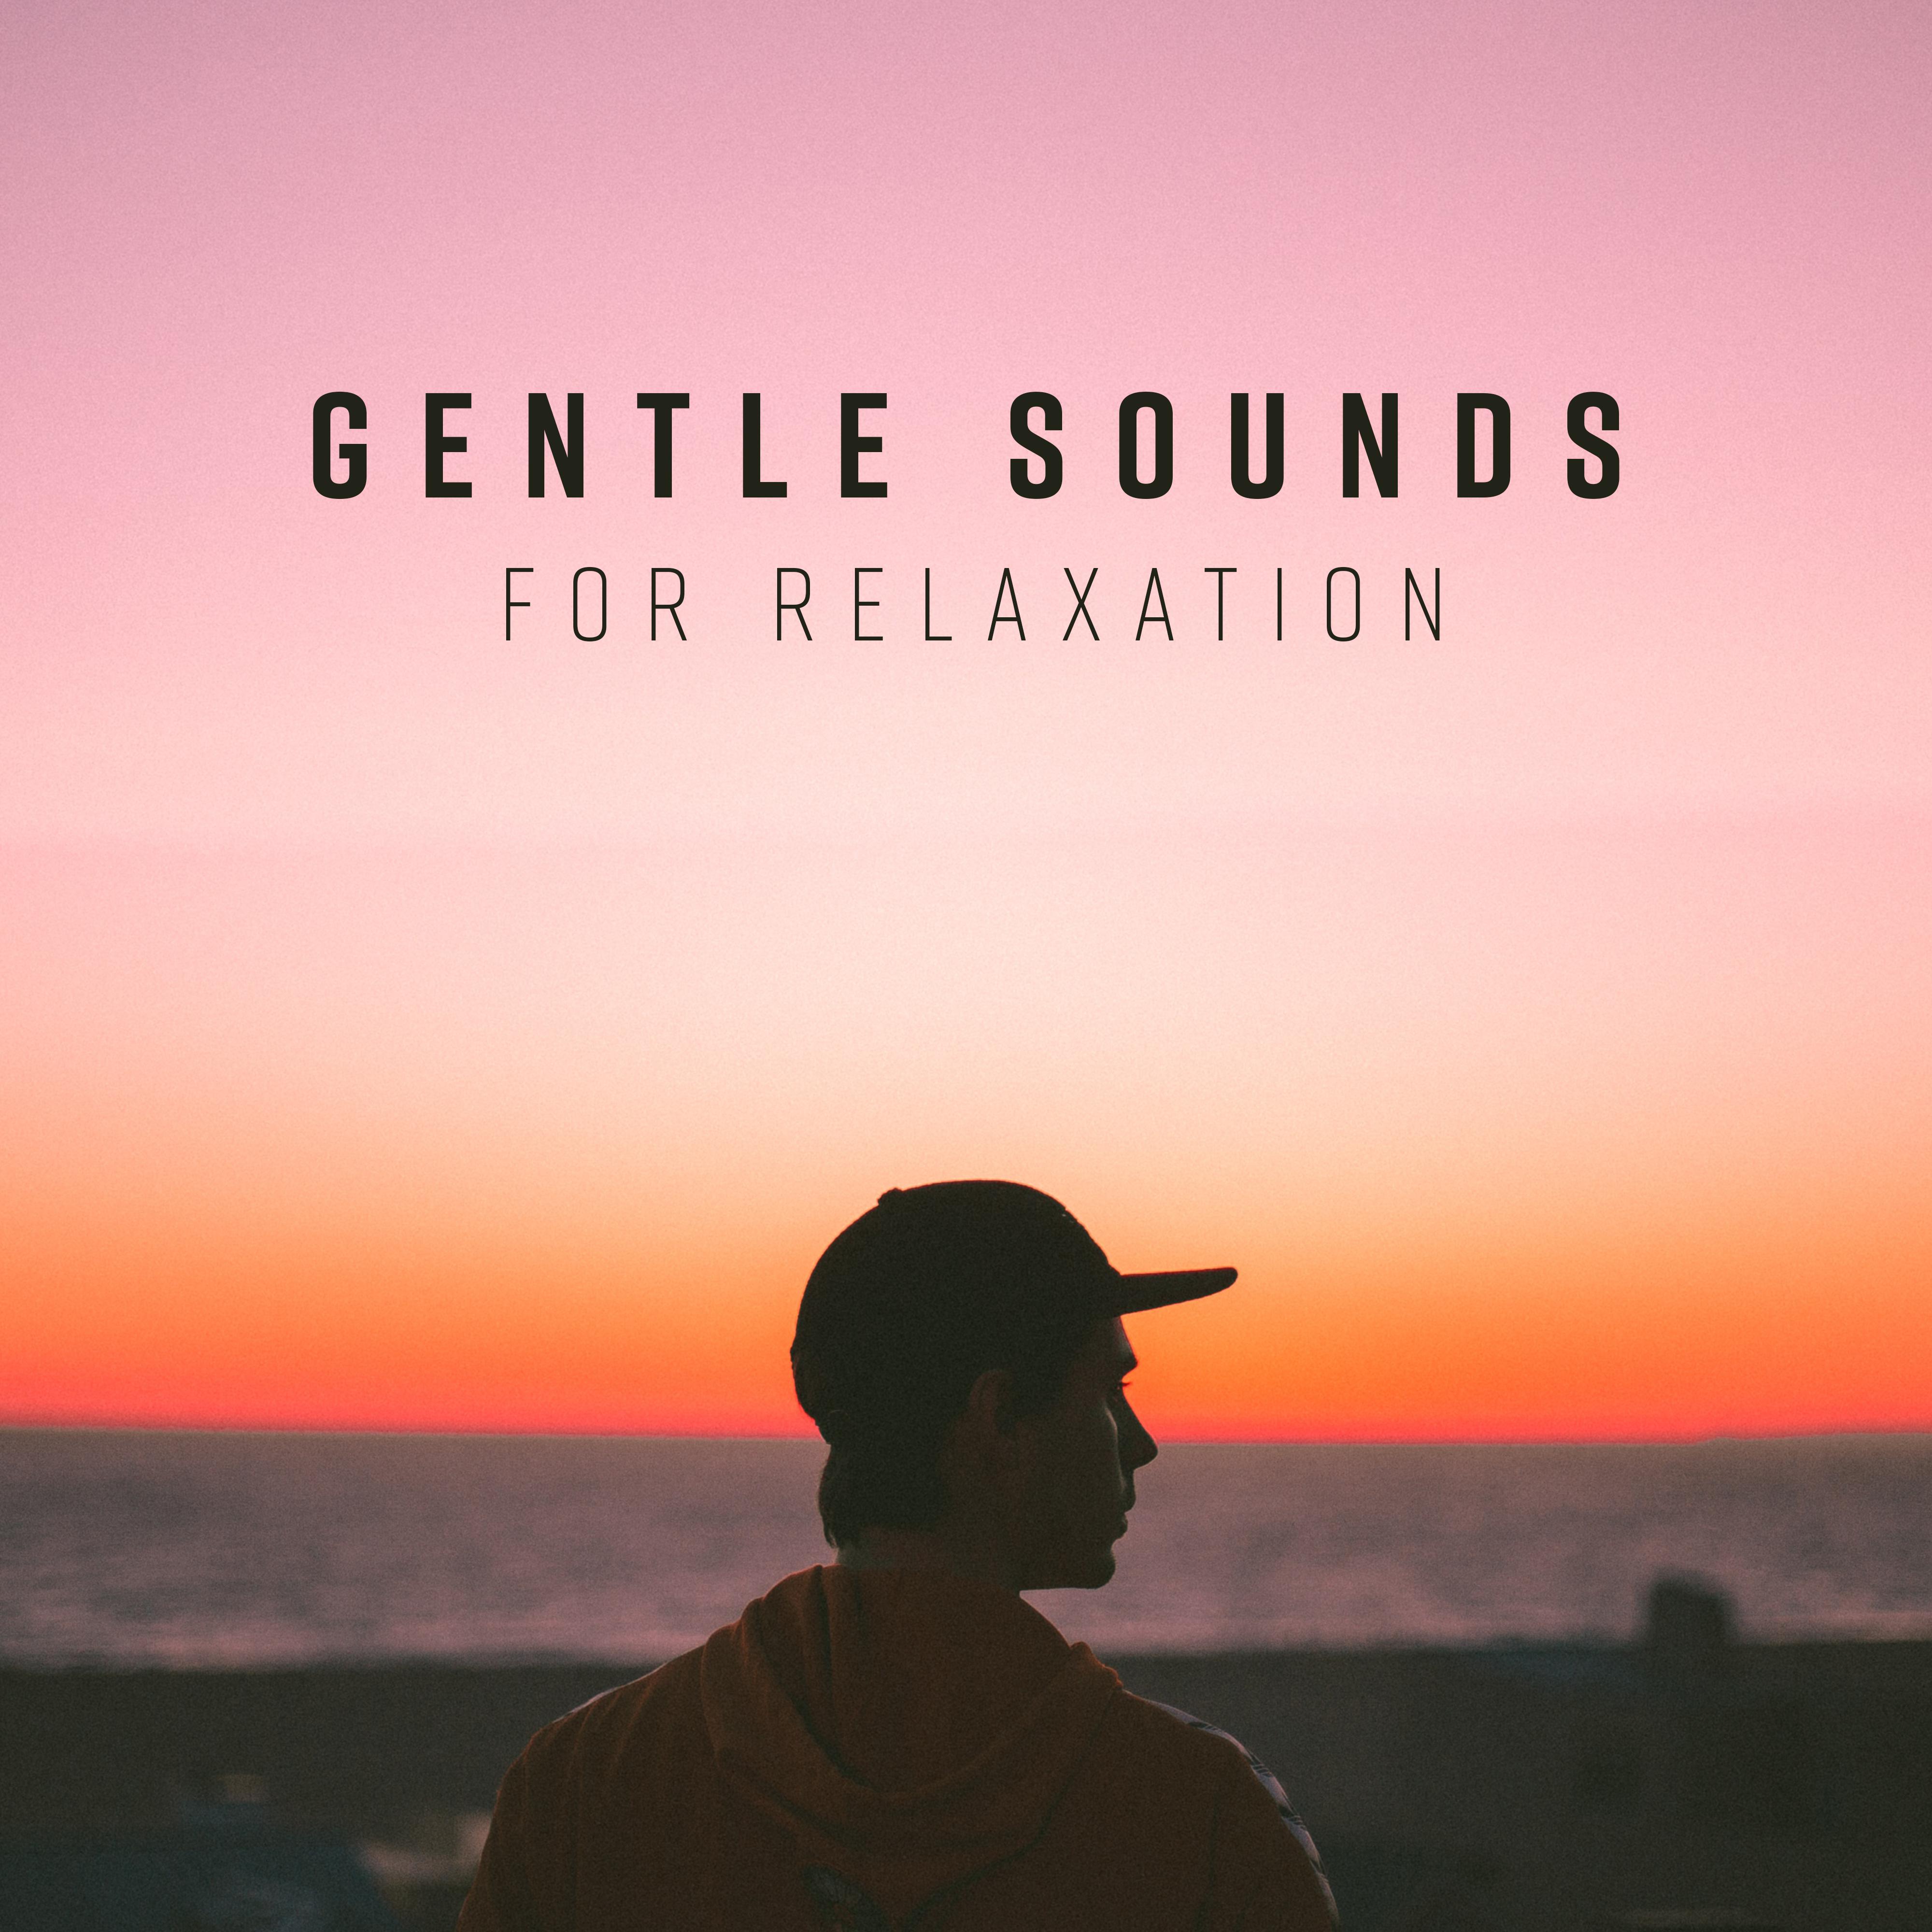 Gentle Sounds for Relaxation